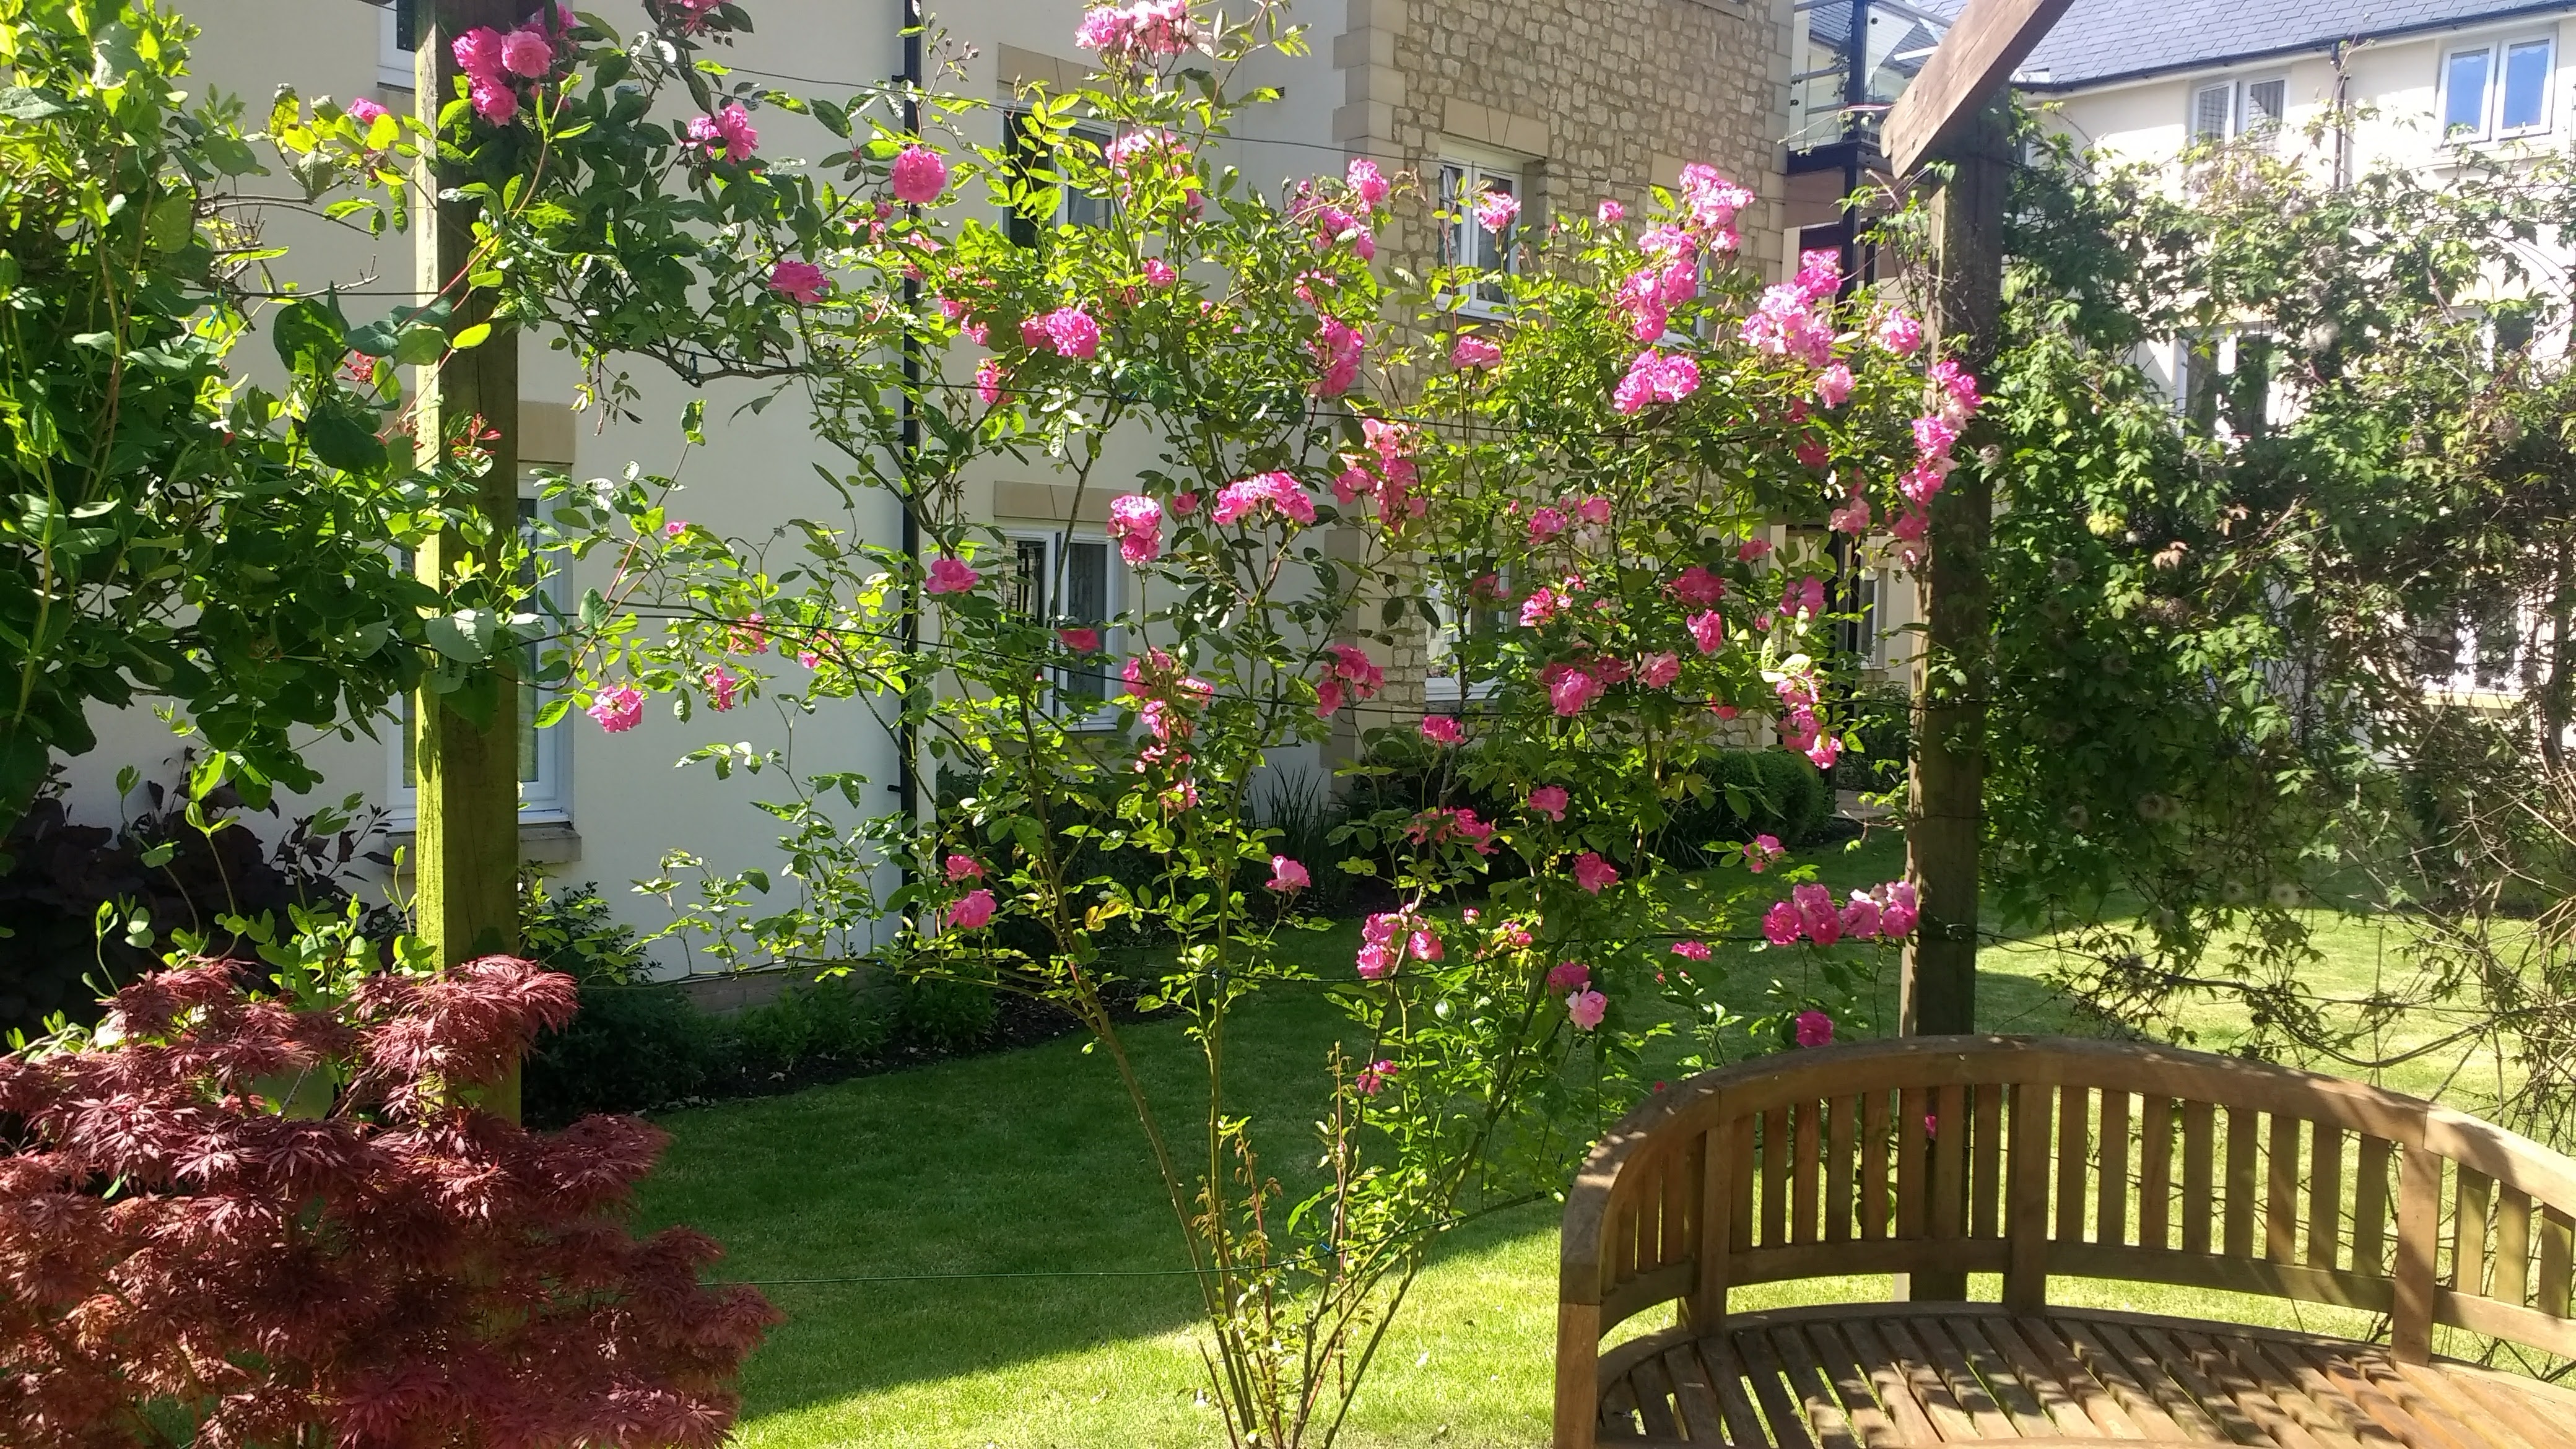 Specialist pruning of climbing rose